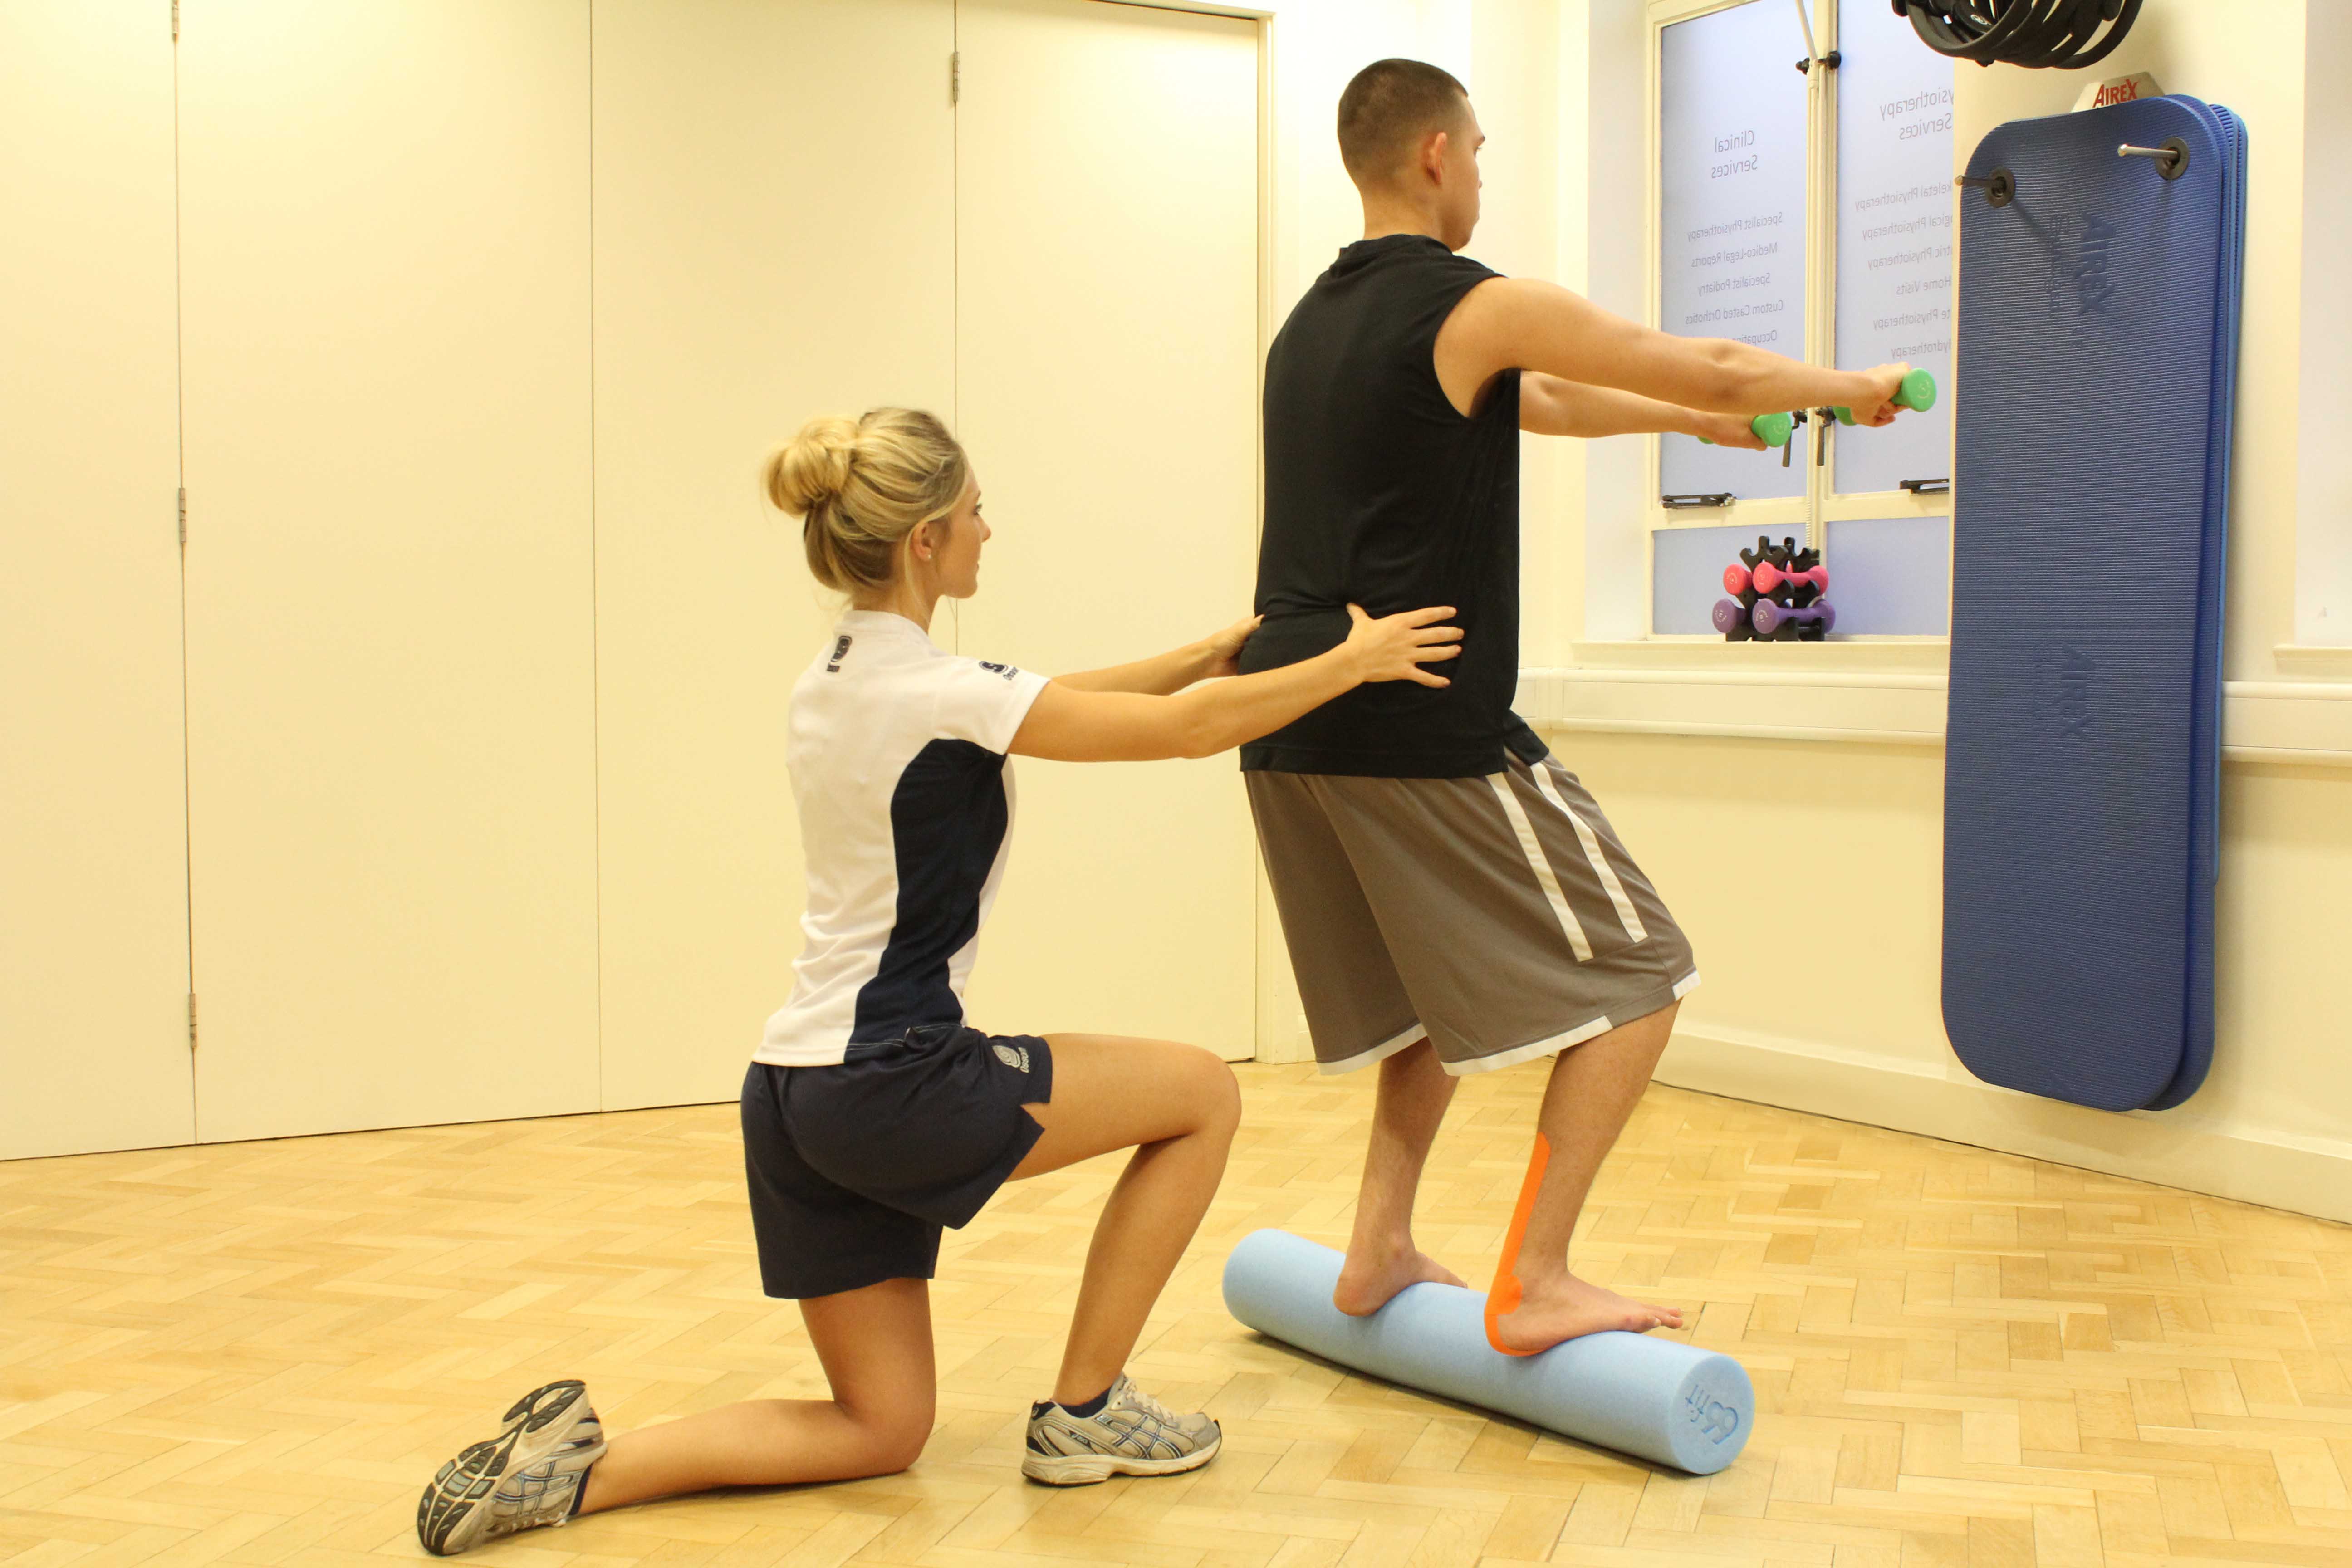 Ankle stability exercises, with supportive tape, supervised by therapist